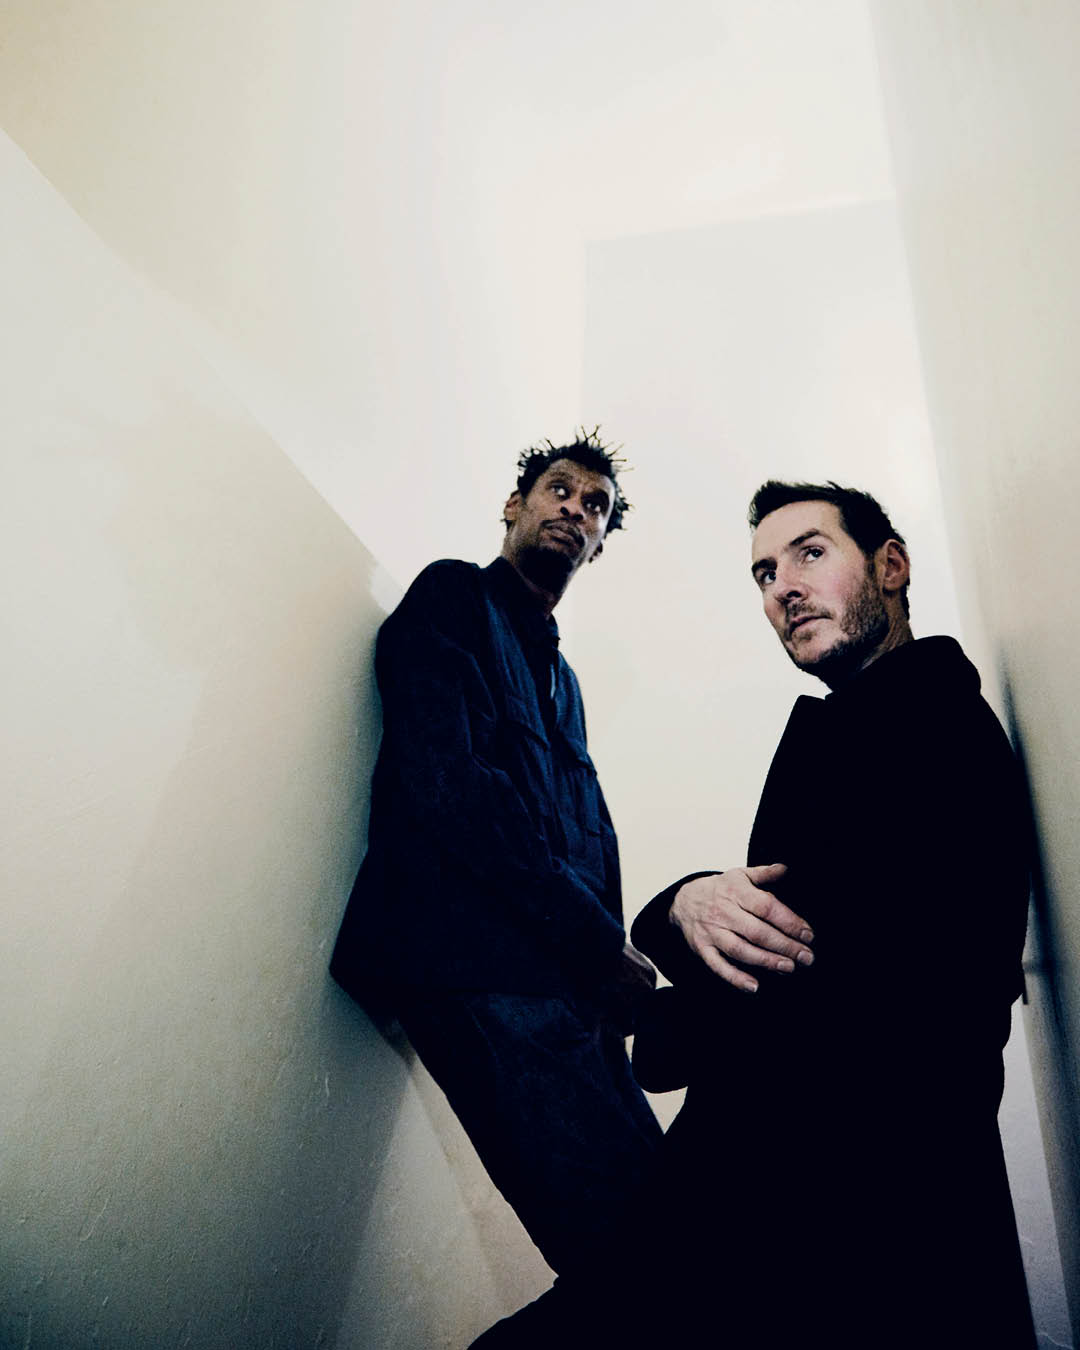 Can festivals become truly sustainable? | Massive Attack portrait